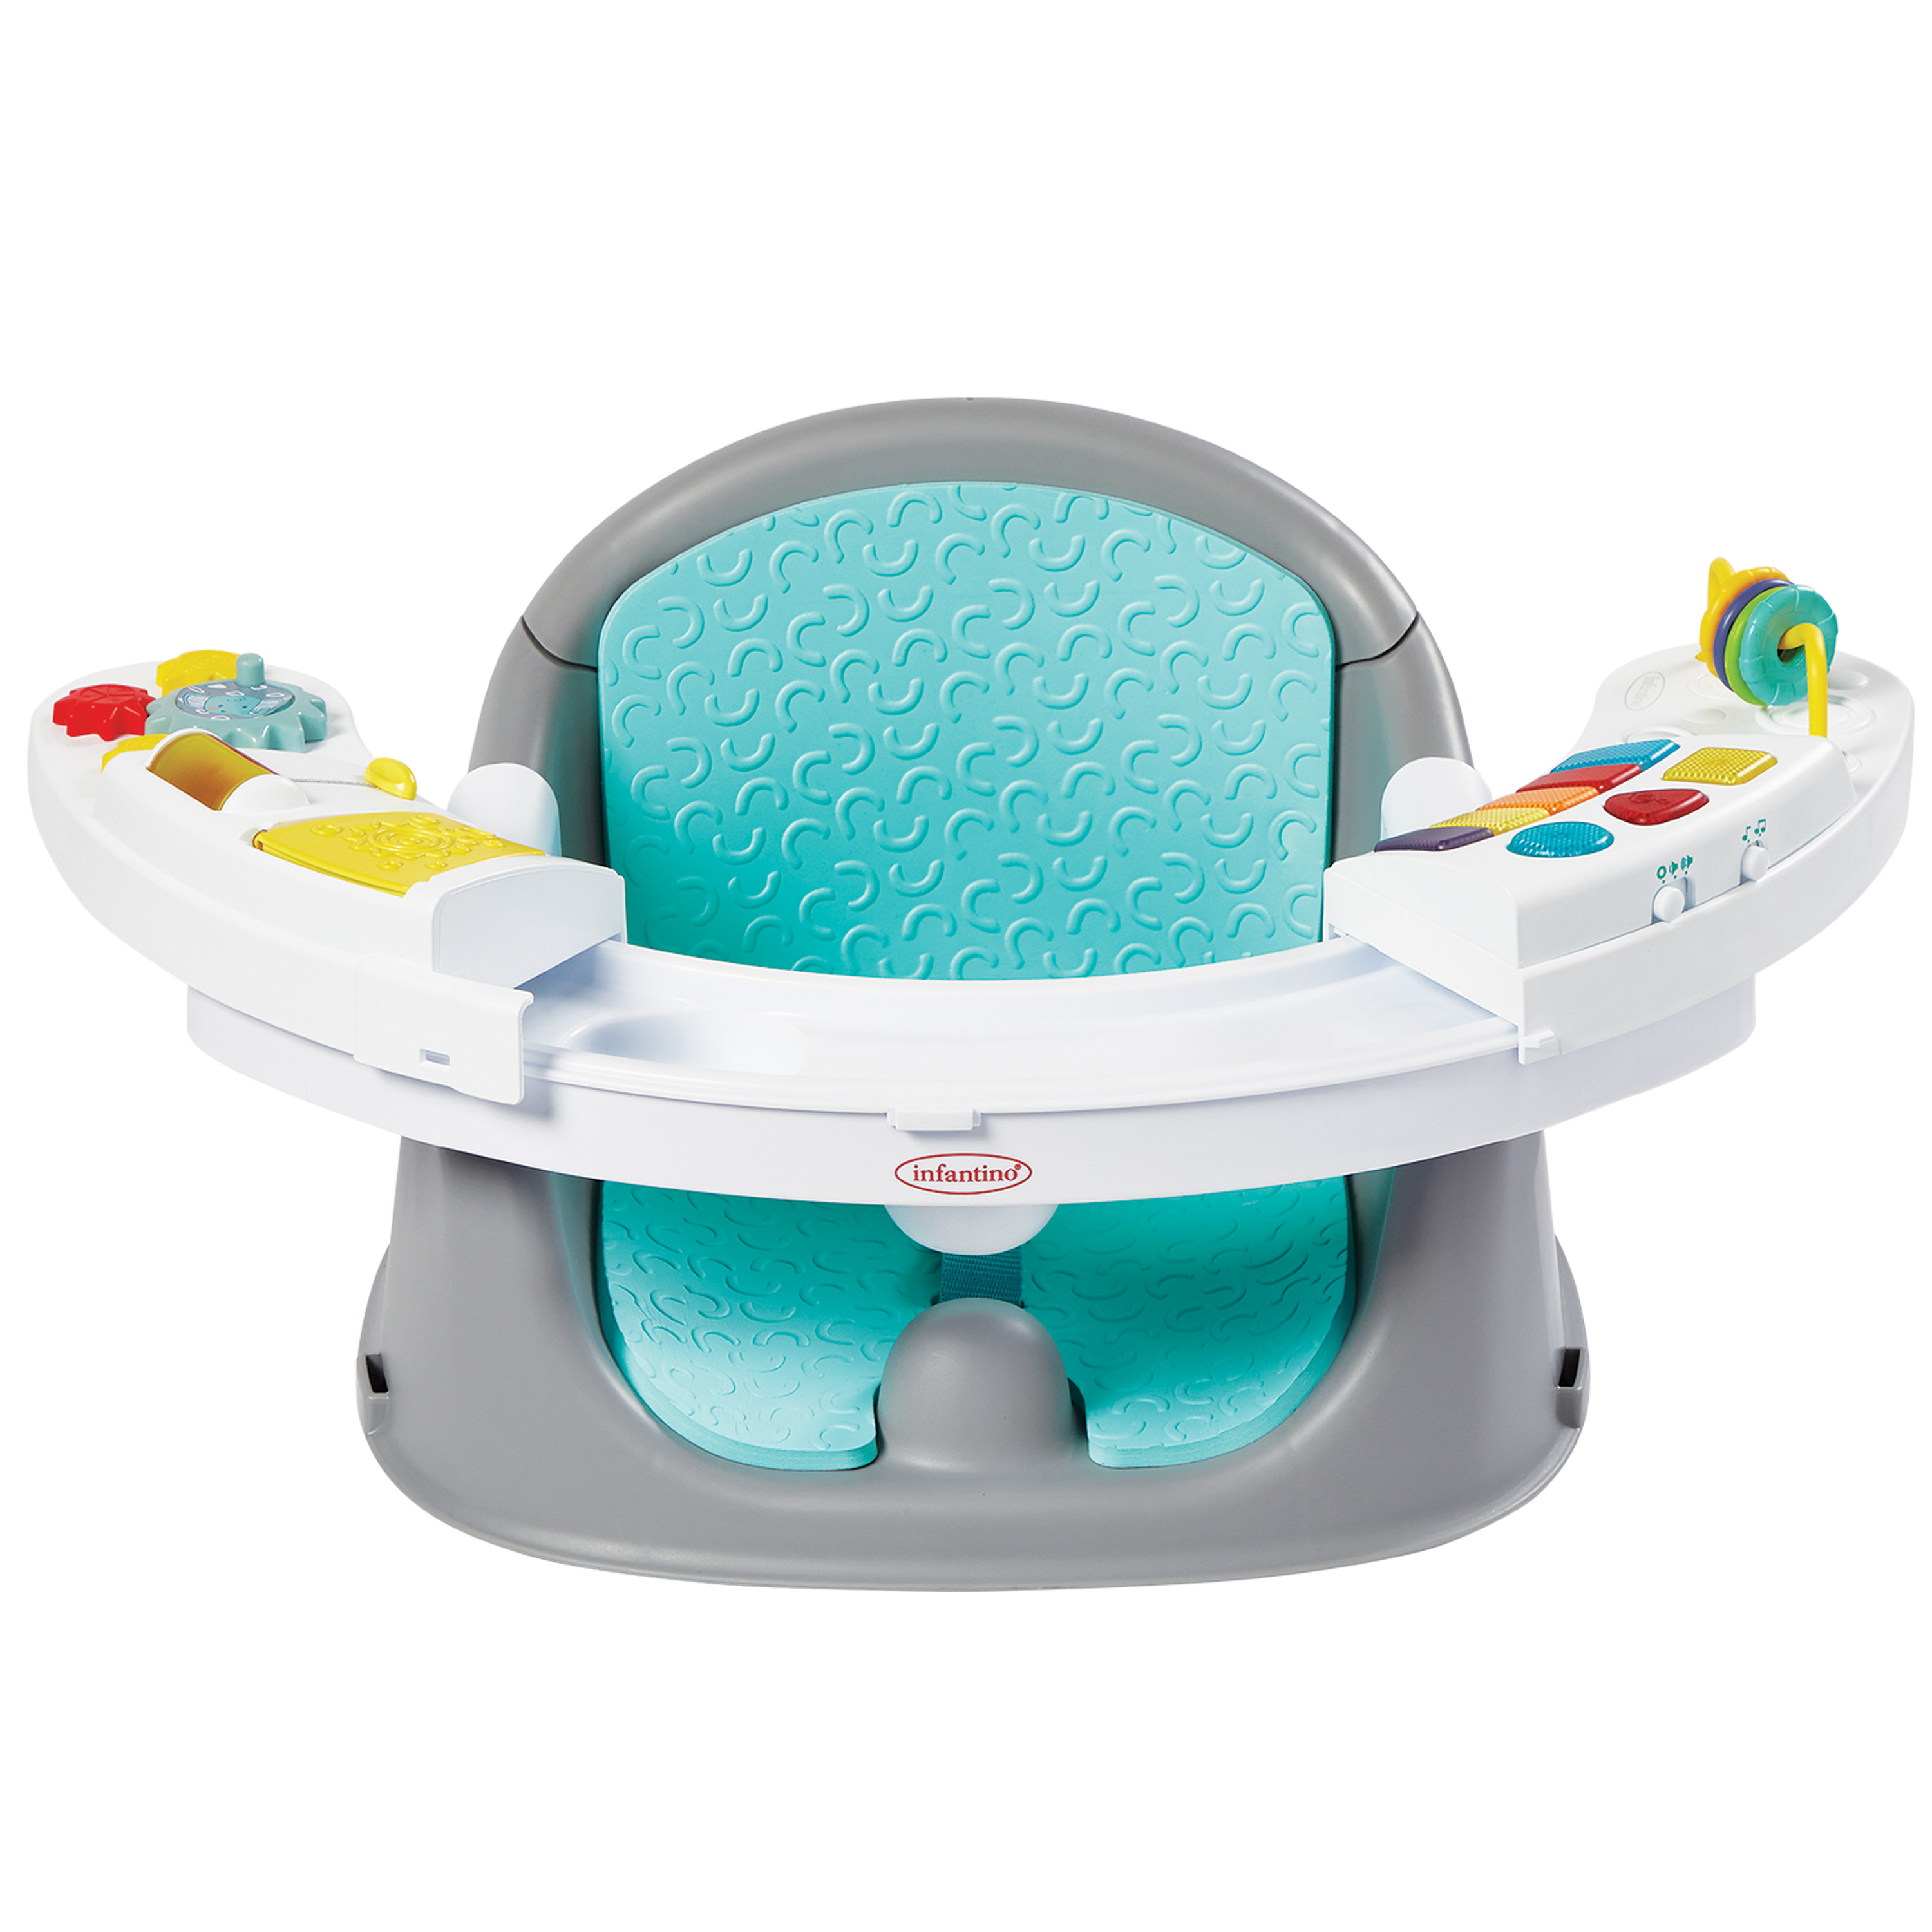 Infantino Music & Lights 3-in-1 Discovery Seat and Booster for Babies and Toddlers, Unisex, Teal - image 3 of 6